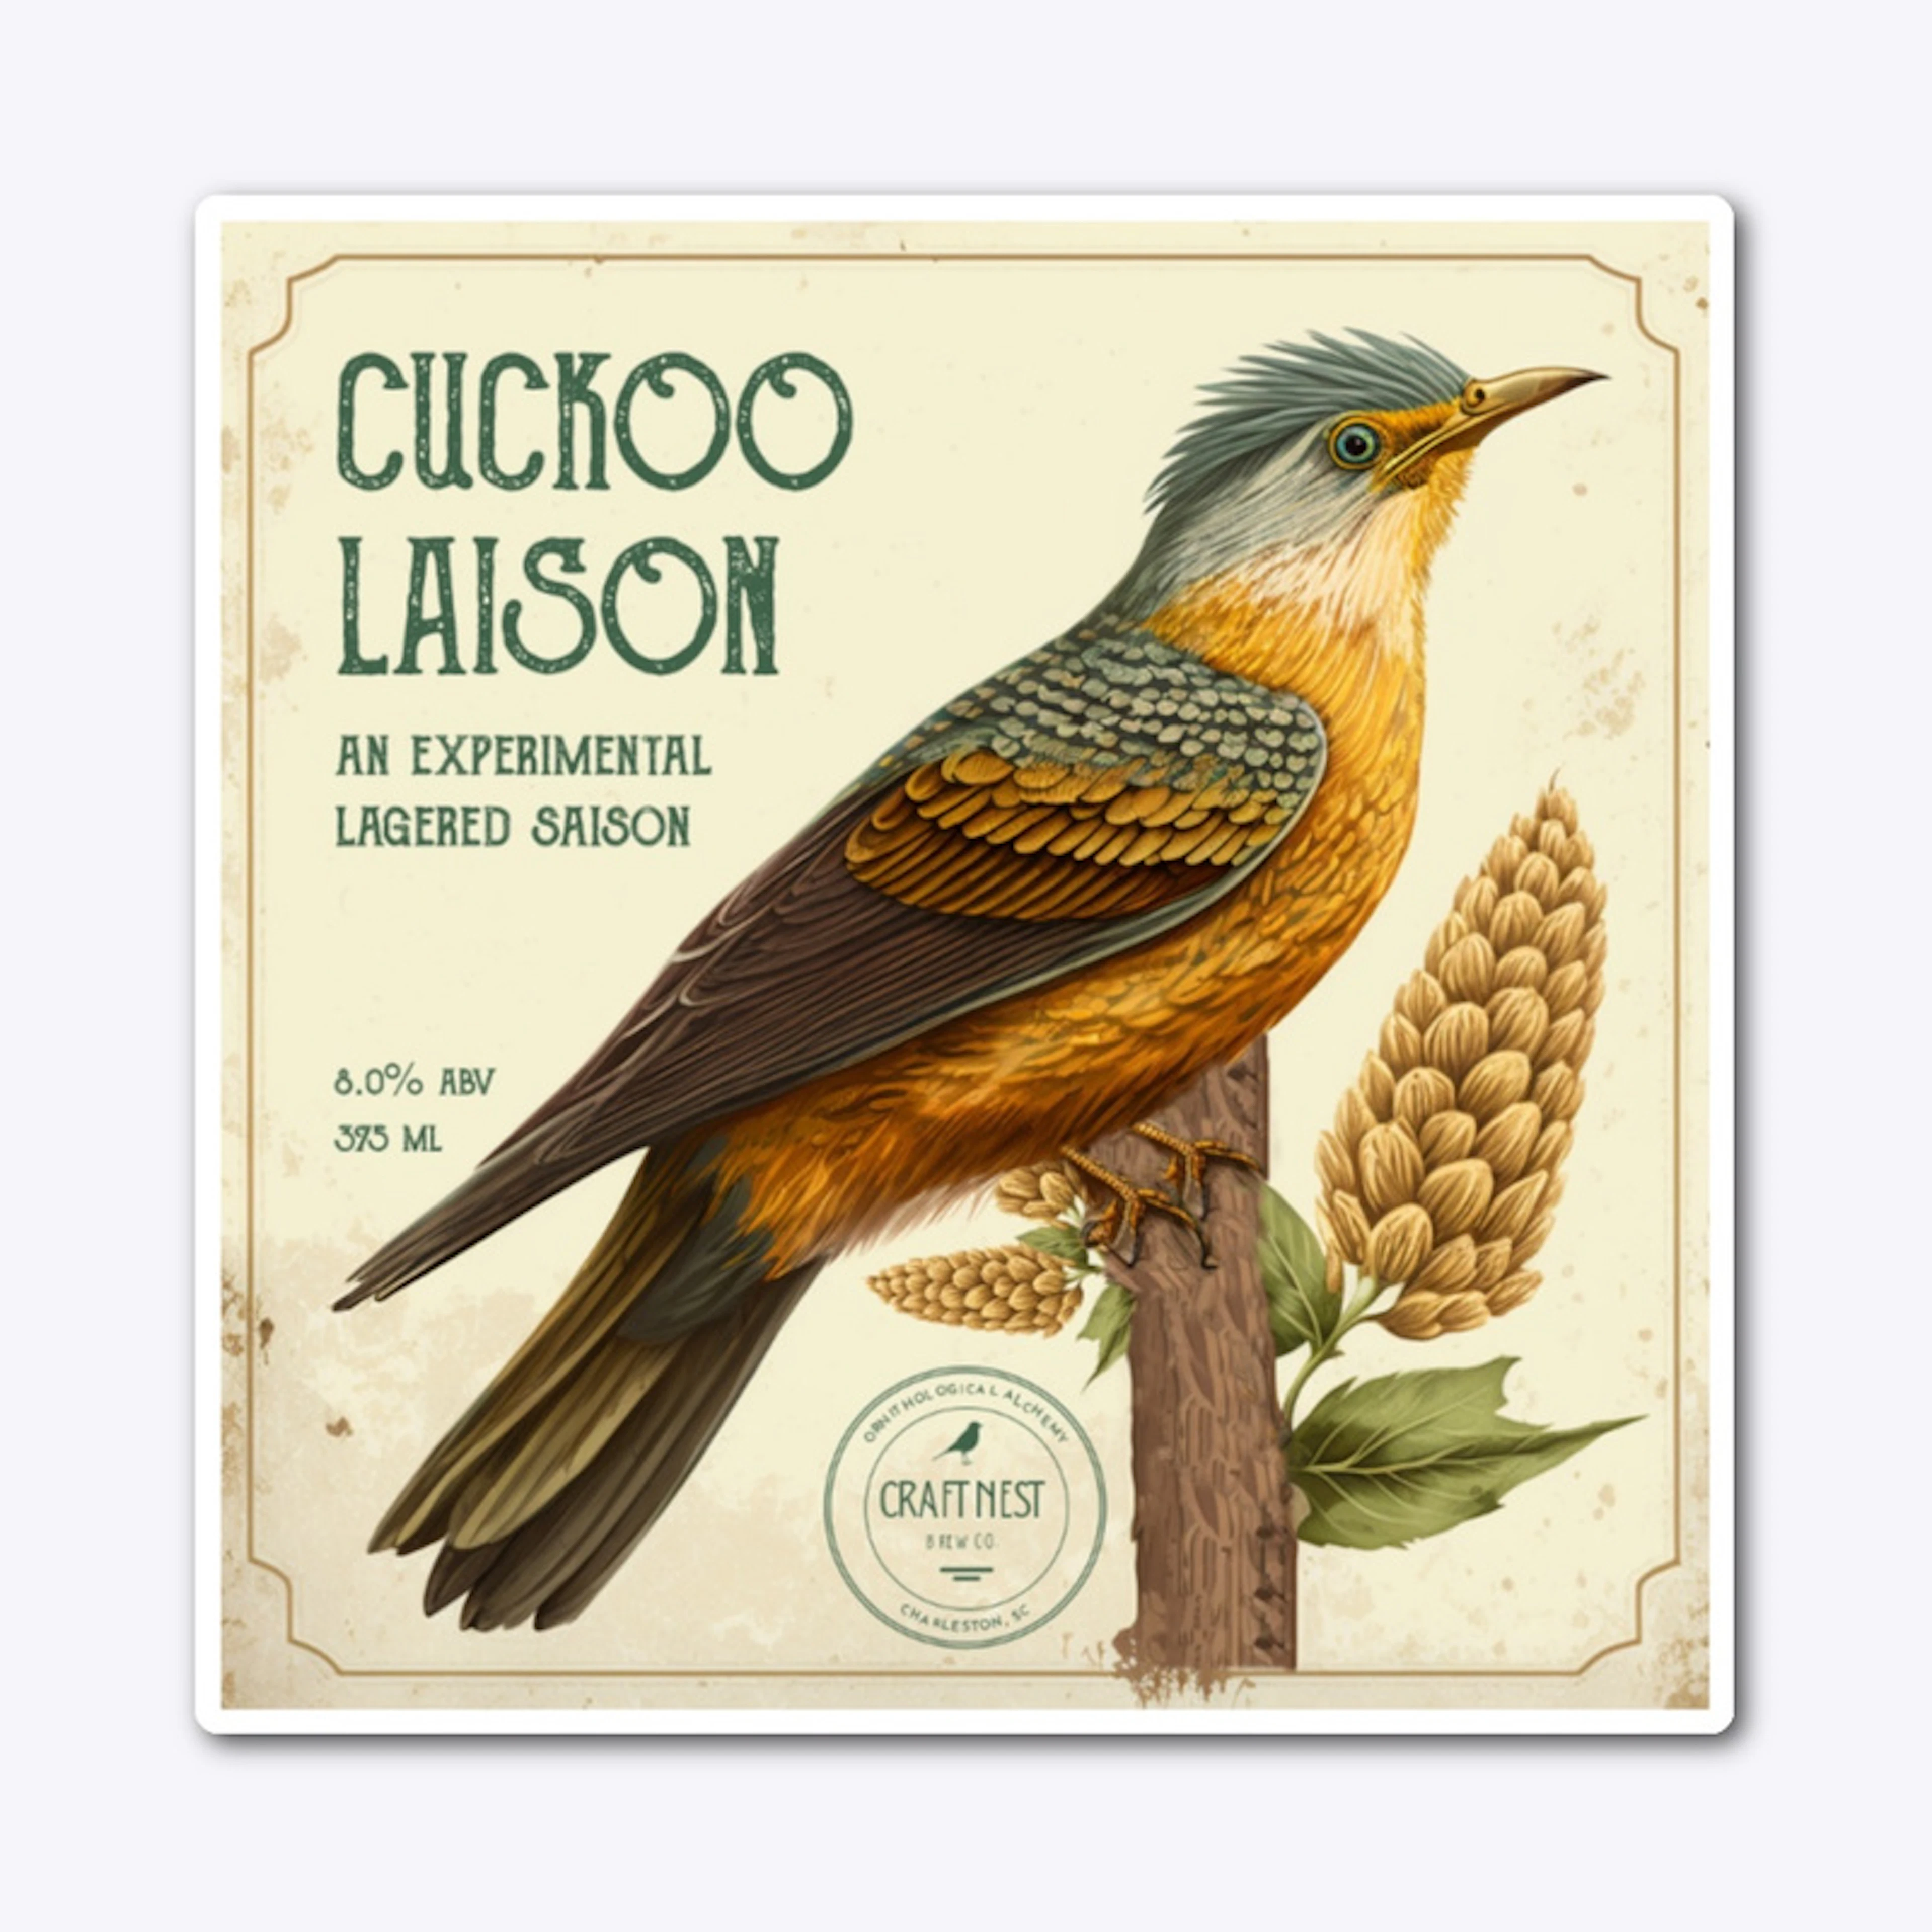 Cuckoo Laison Limited Edition